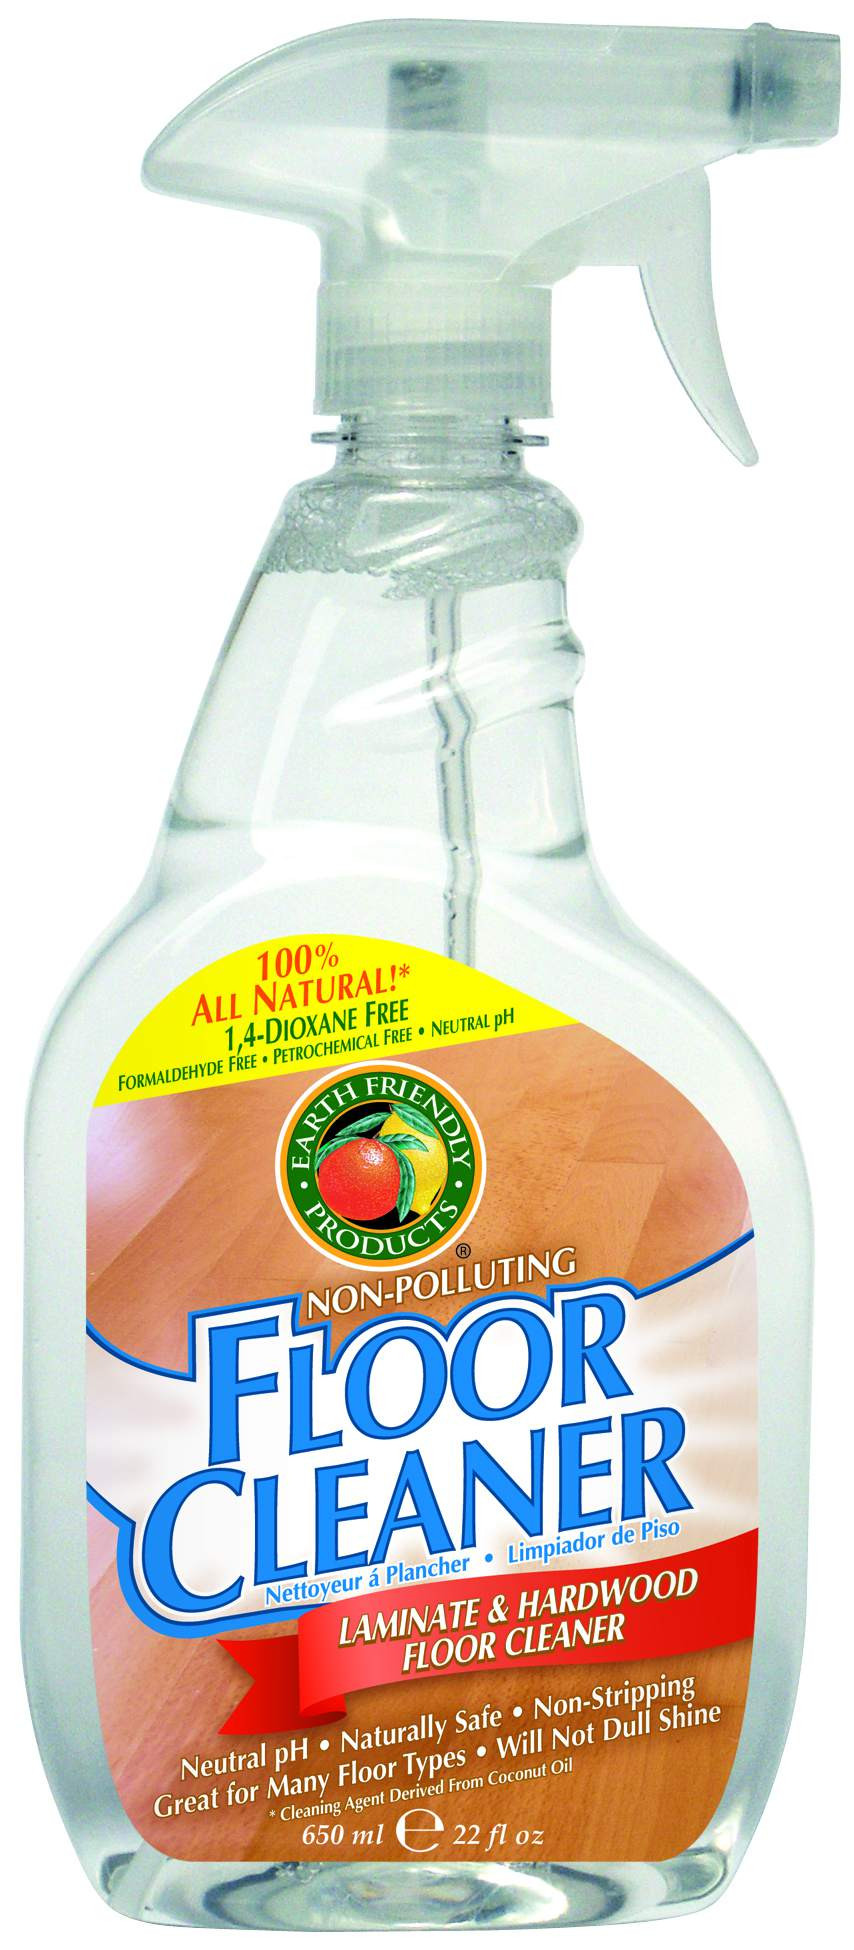 hardwood floor cleaning solution of adore your wood floors with these eco friendly cleaners throughout earth friendly products floor cleaner9725 floorcleaner aug10 56a45e363df78cf772820af4